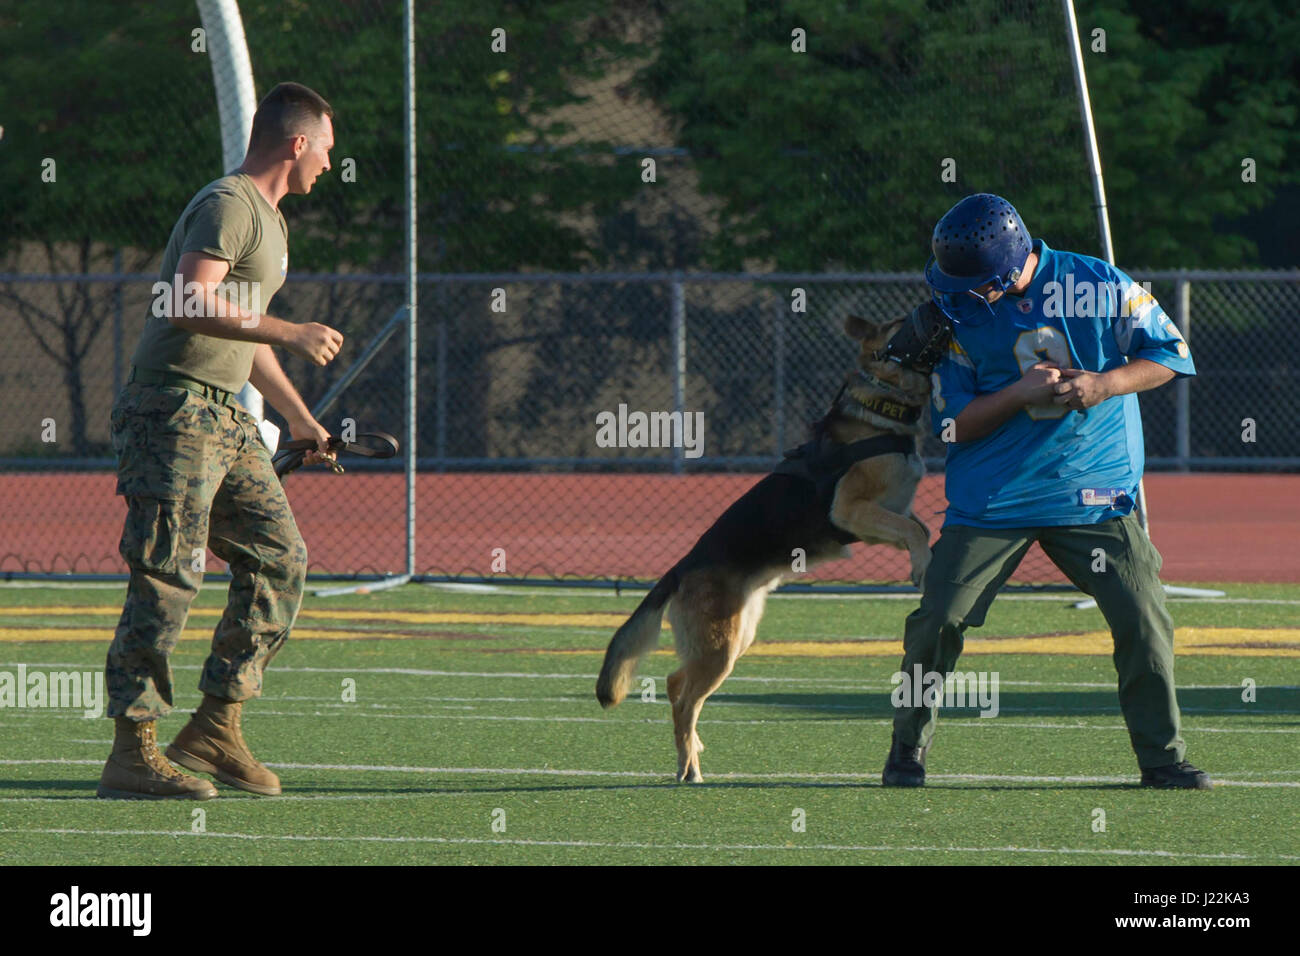 U.S. Marine Corps Lance Cpl. John Ball, left, Provost Marshal Office, calls off his canine, Baz, after a training event at the 1st Annual City of Oceanside Public Safety Fair at El Camino High School football field in Oceanside, Calif., April 22, 2017. (U.S. Marine Corps photo by Lance Cpl. Brooke Woods) Stock Photo